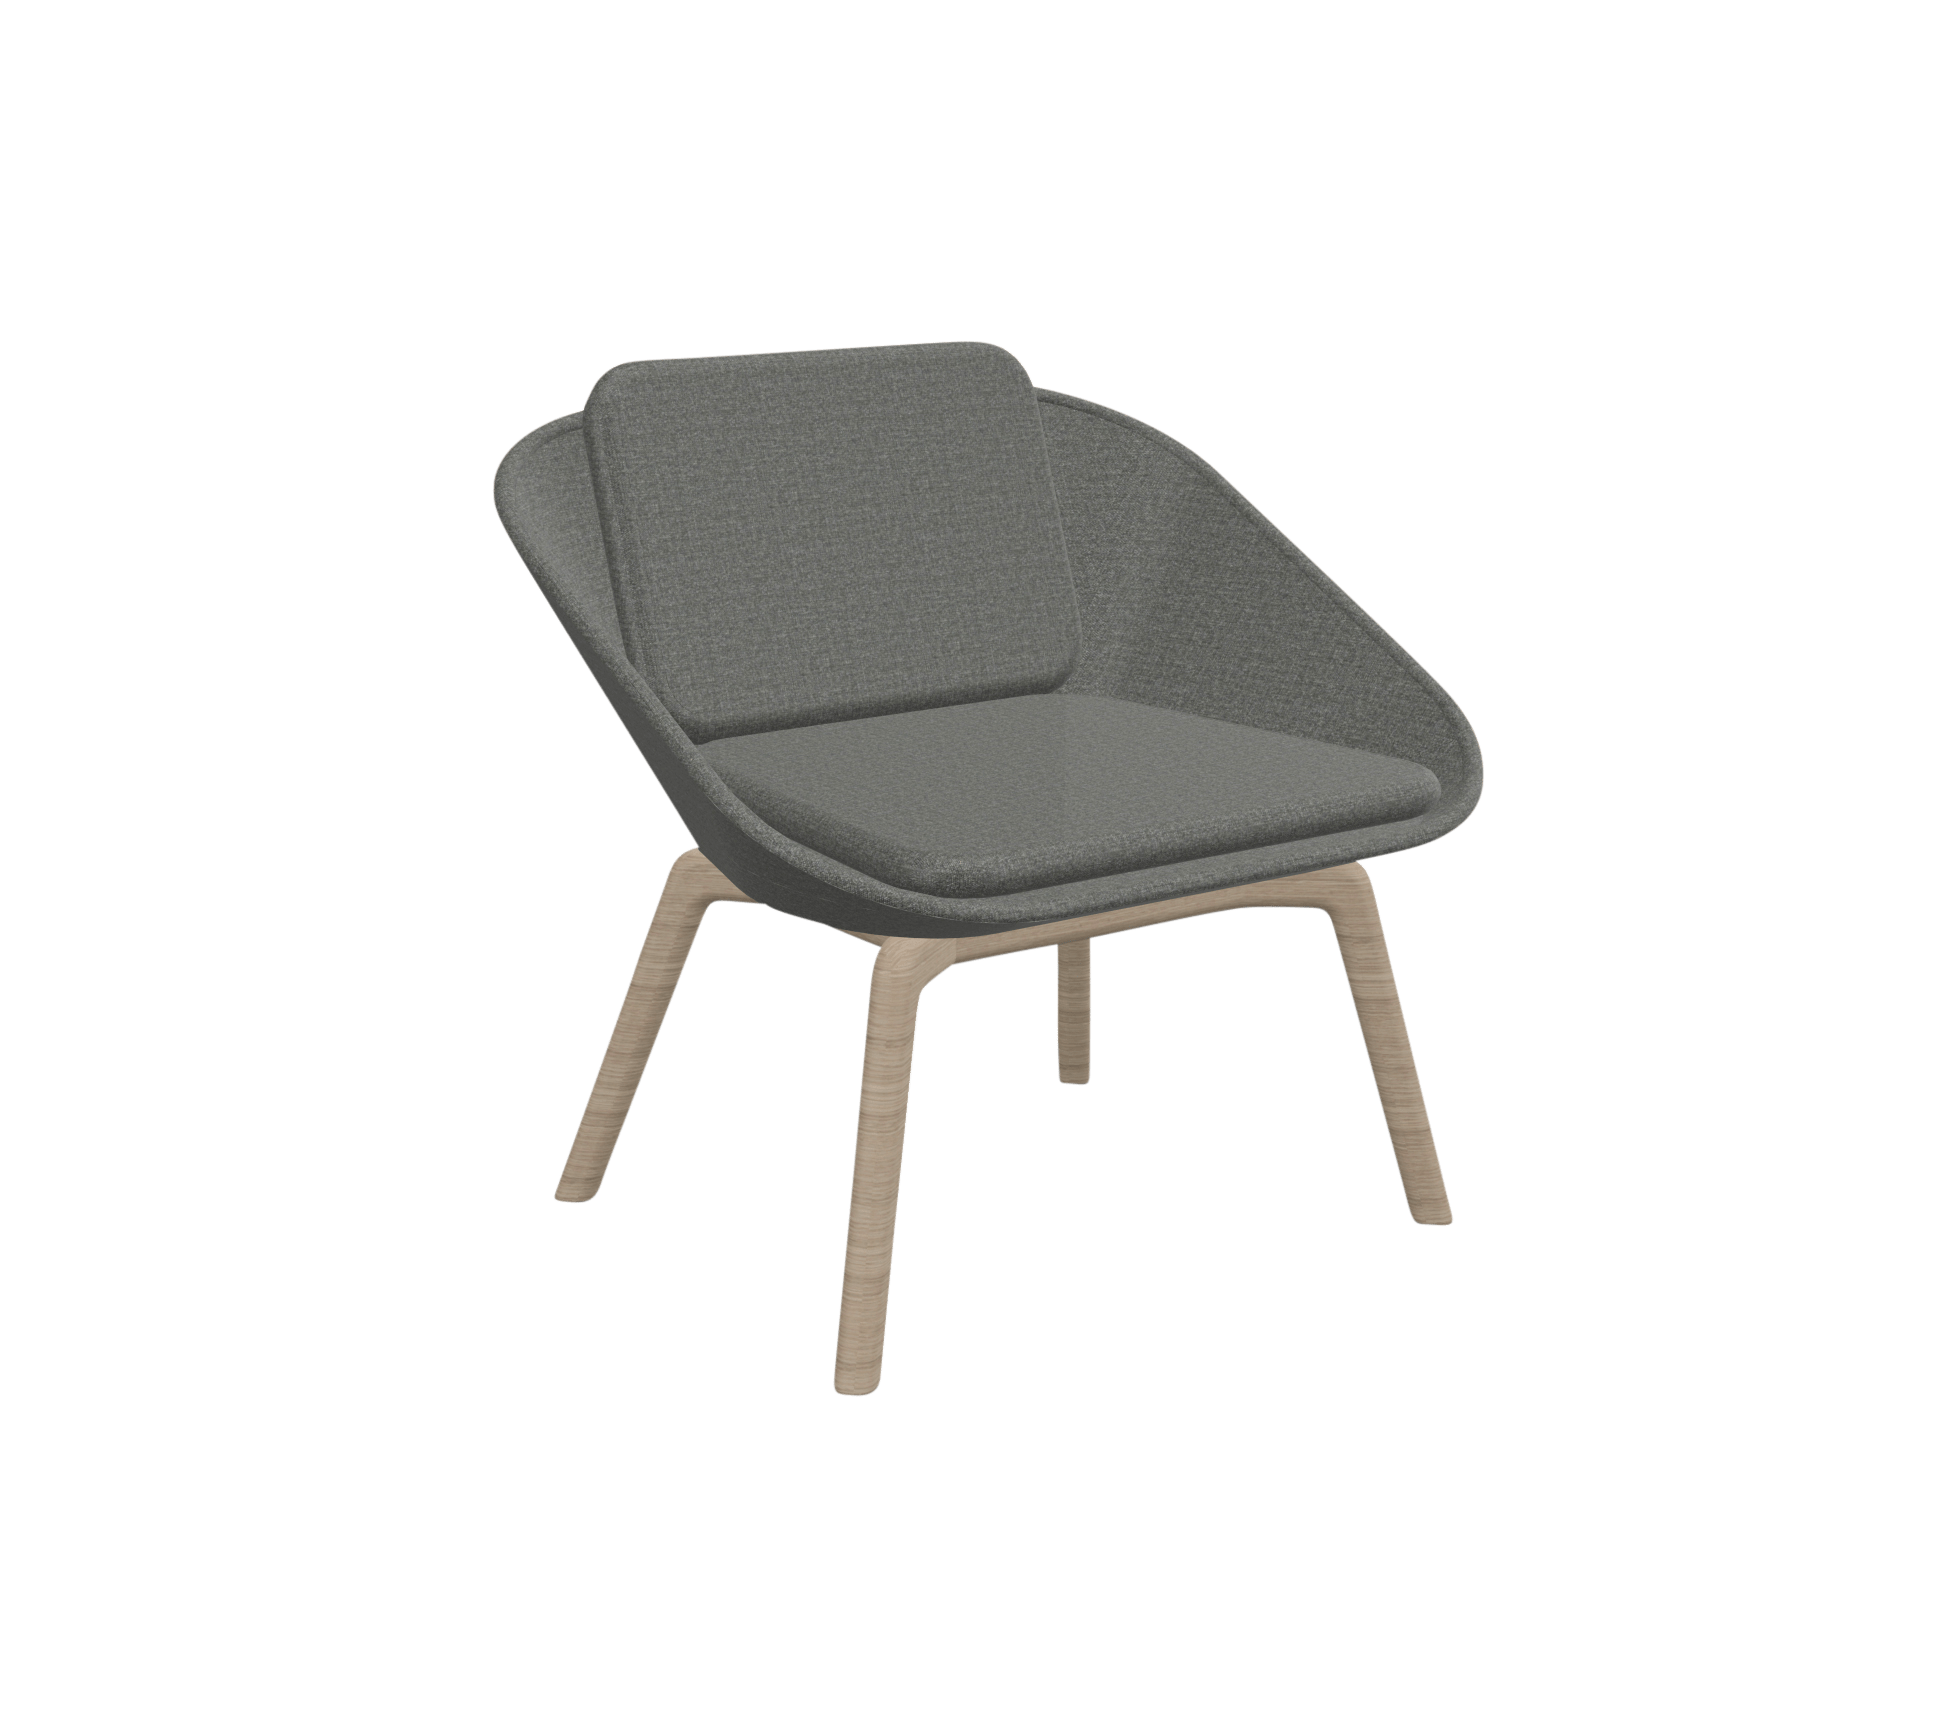 A grey lounge chair with wooden legs.